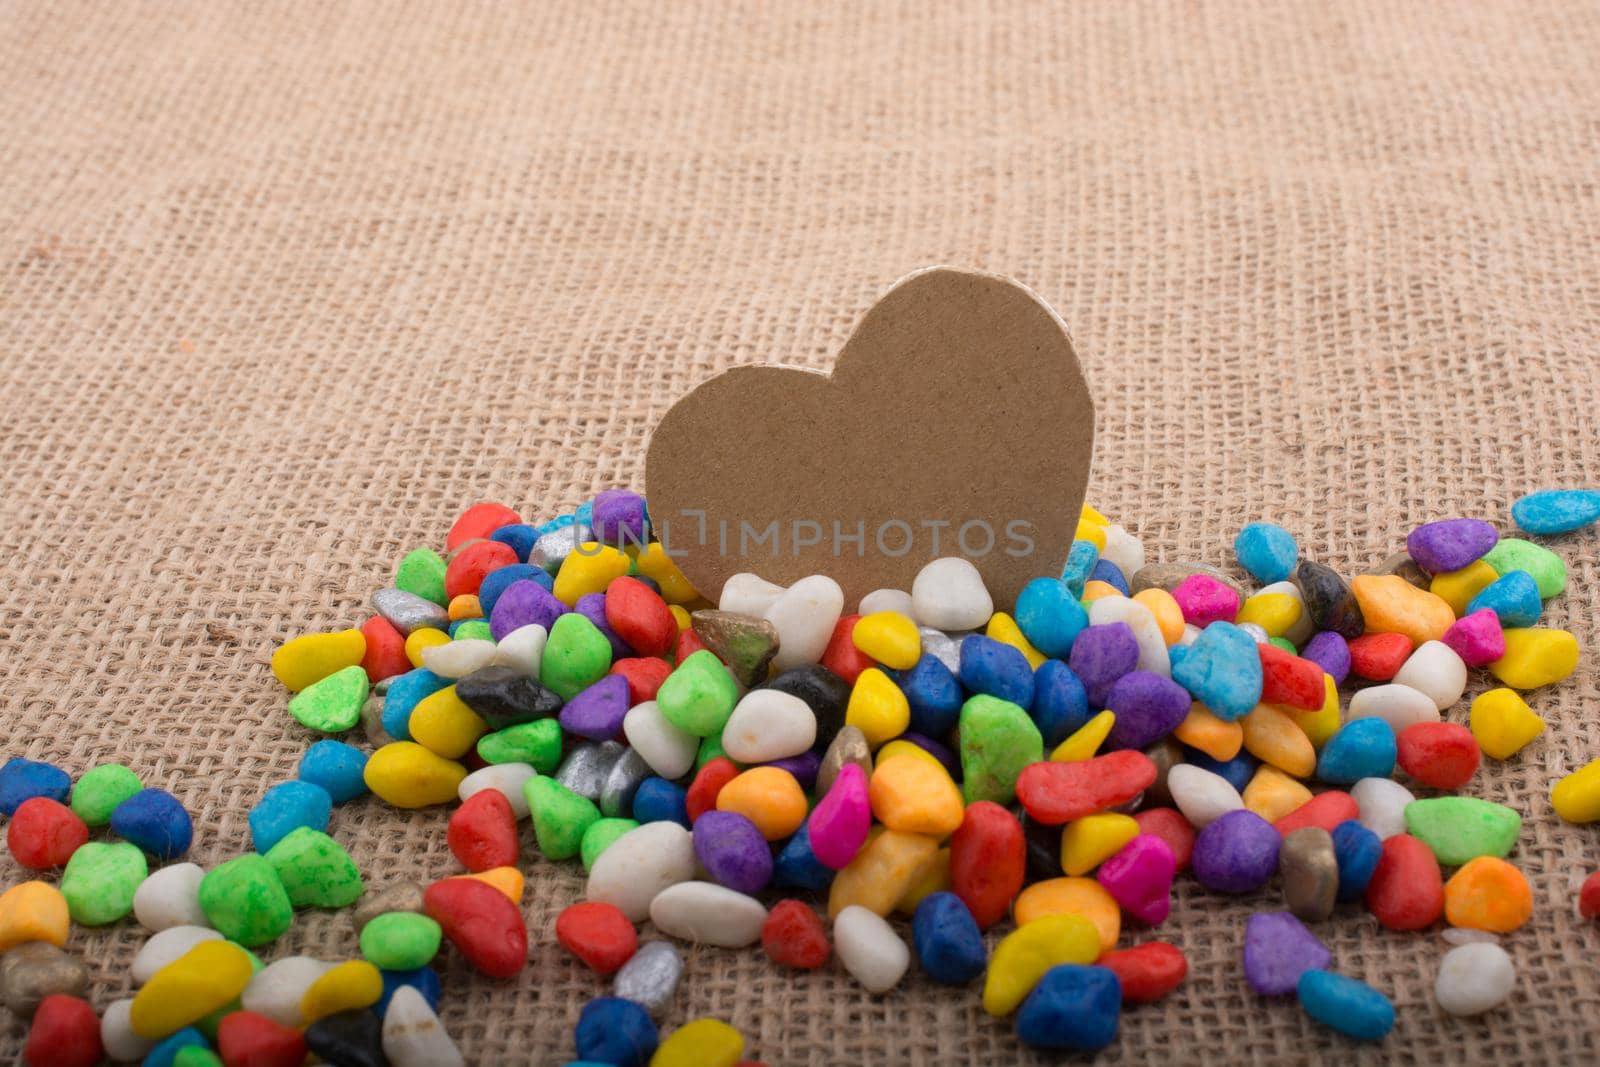 Paper heart amid pebbles on canvas ground by berkay